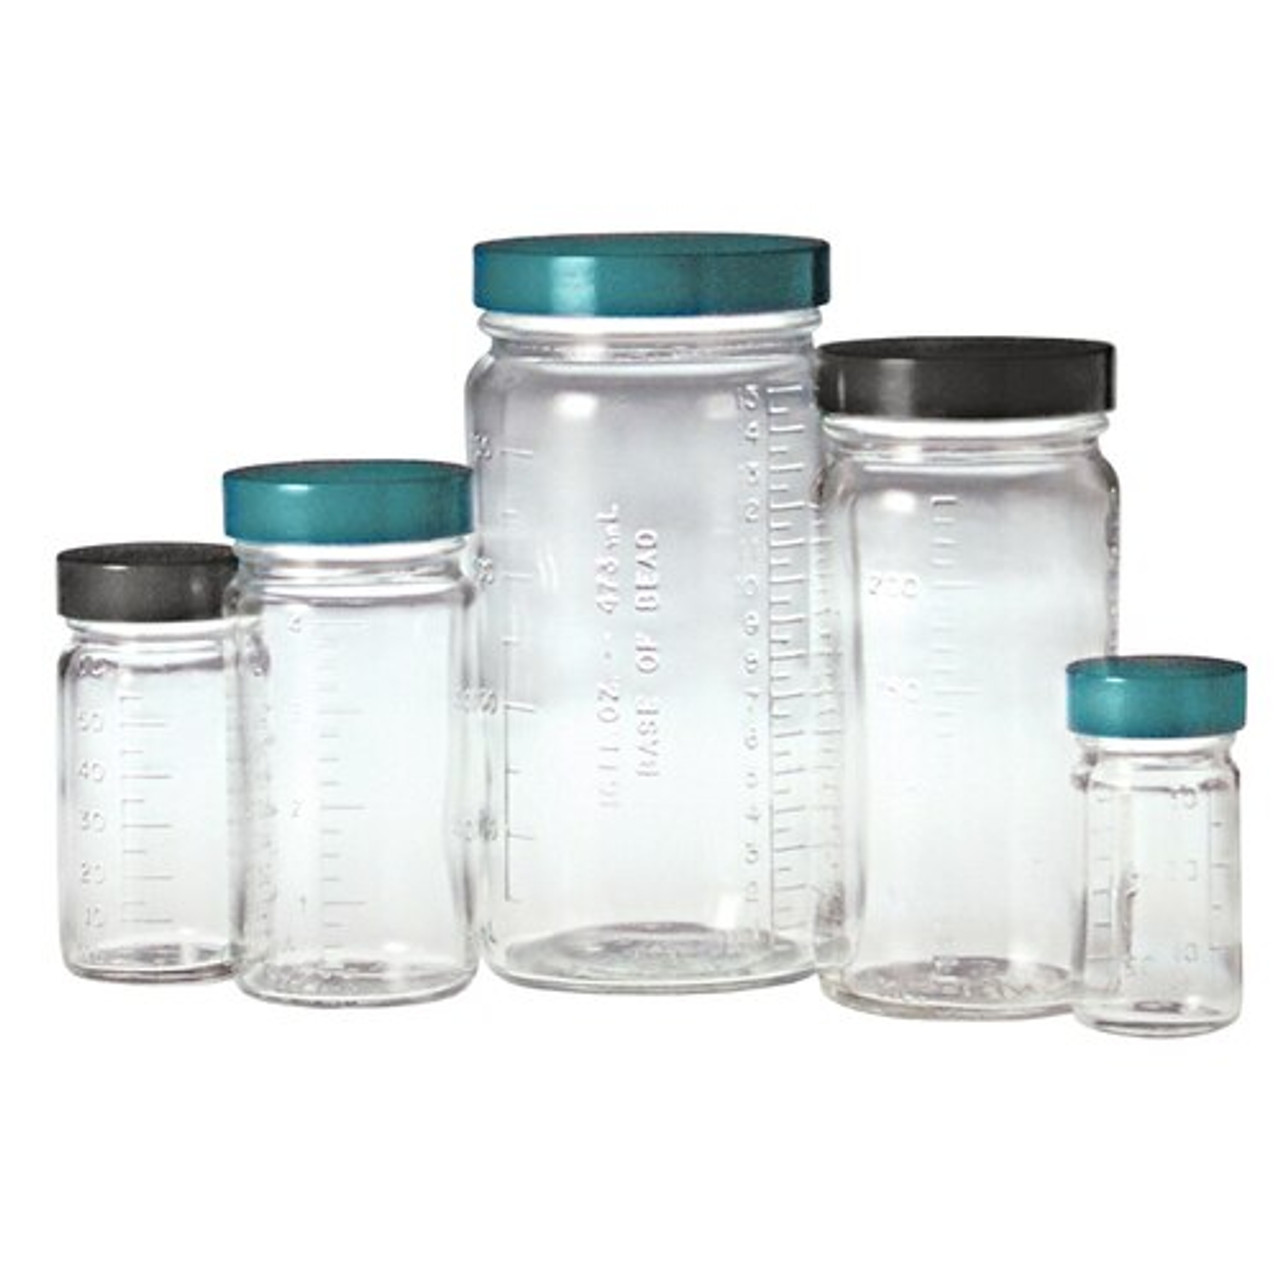 Graduated Wide Mouth Jar, 4oz, Green PTFE Lined Cap